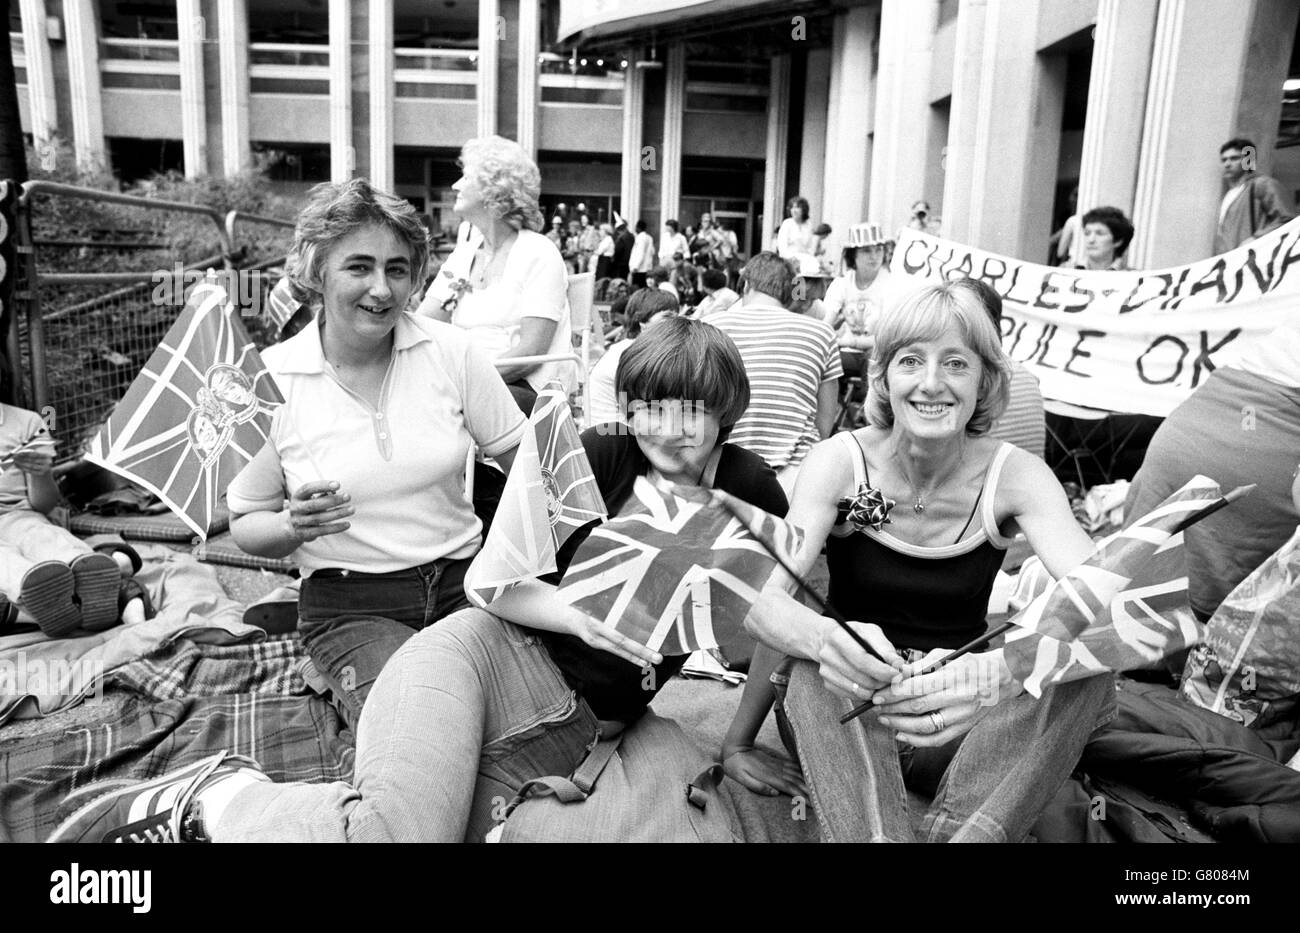 (L-R) Joan Roddam, from Darras Hall, Newcastle Upon Tyne, her daughter Wendy, 15 and Joan Percy, from South Queensferry, West Lothian, stake out their position for the Royal Wedding outside St Paul's. Stock Photo